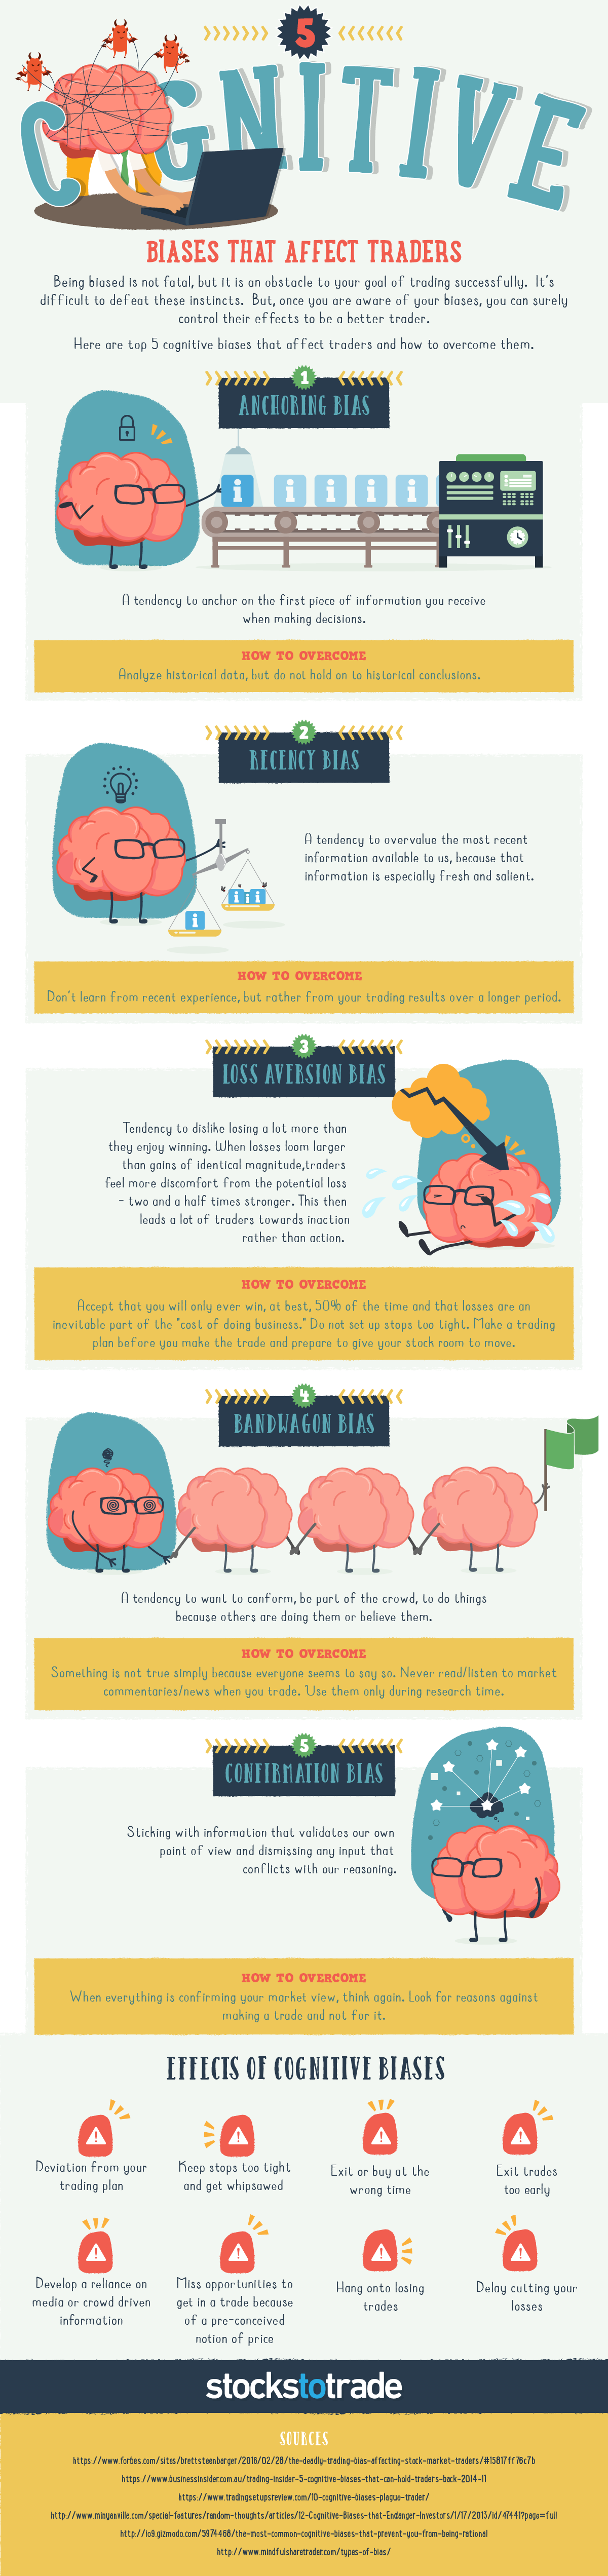 5 Cognitive Biases That Affect Traders {INFOGRAPHIC}